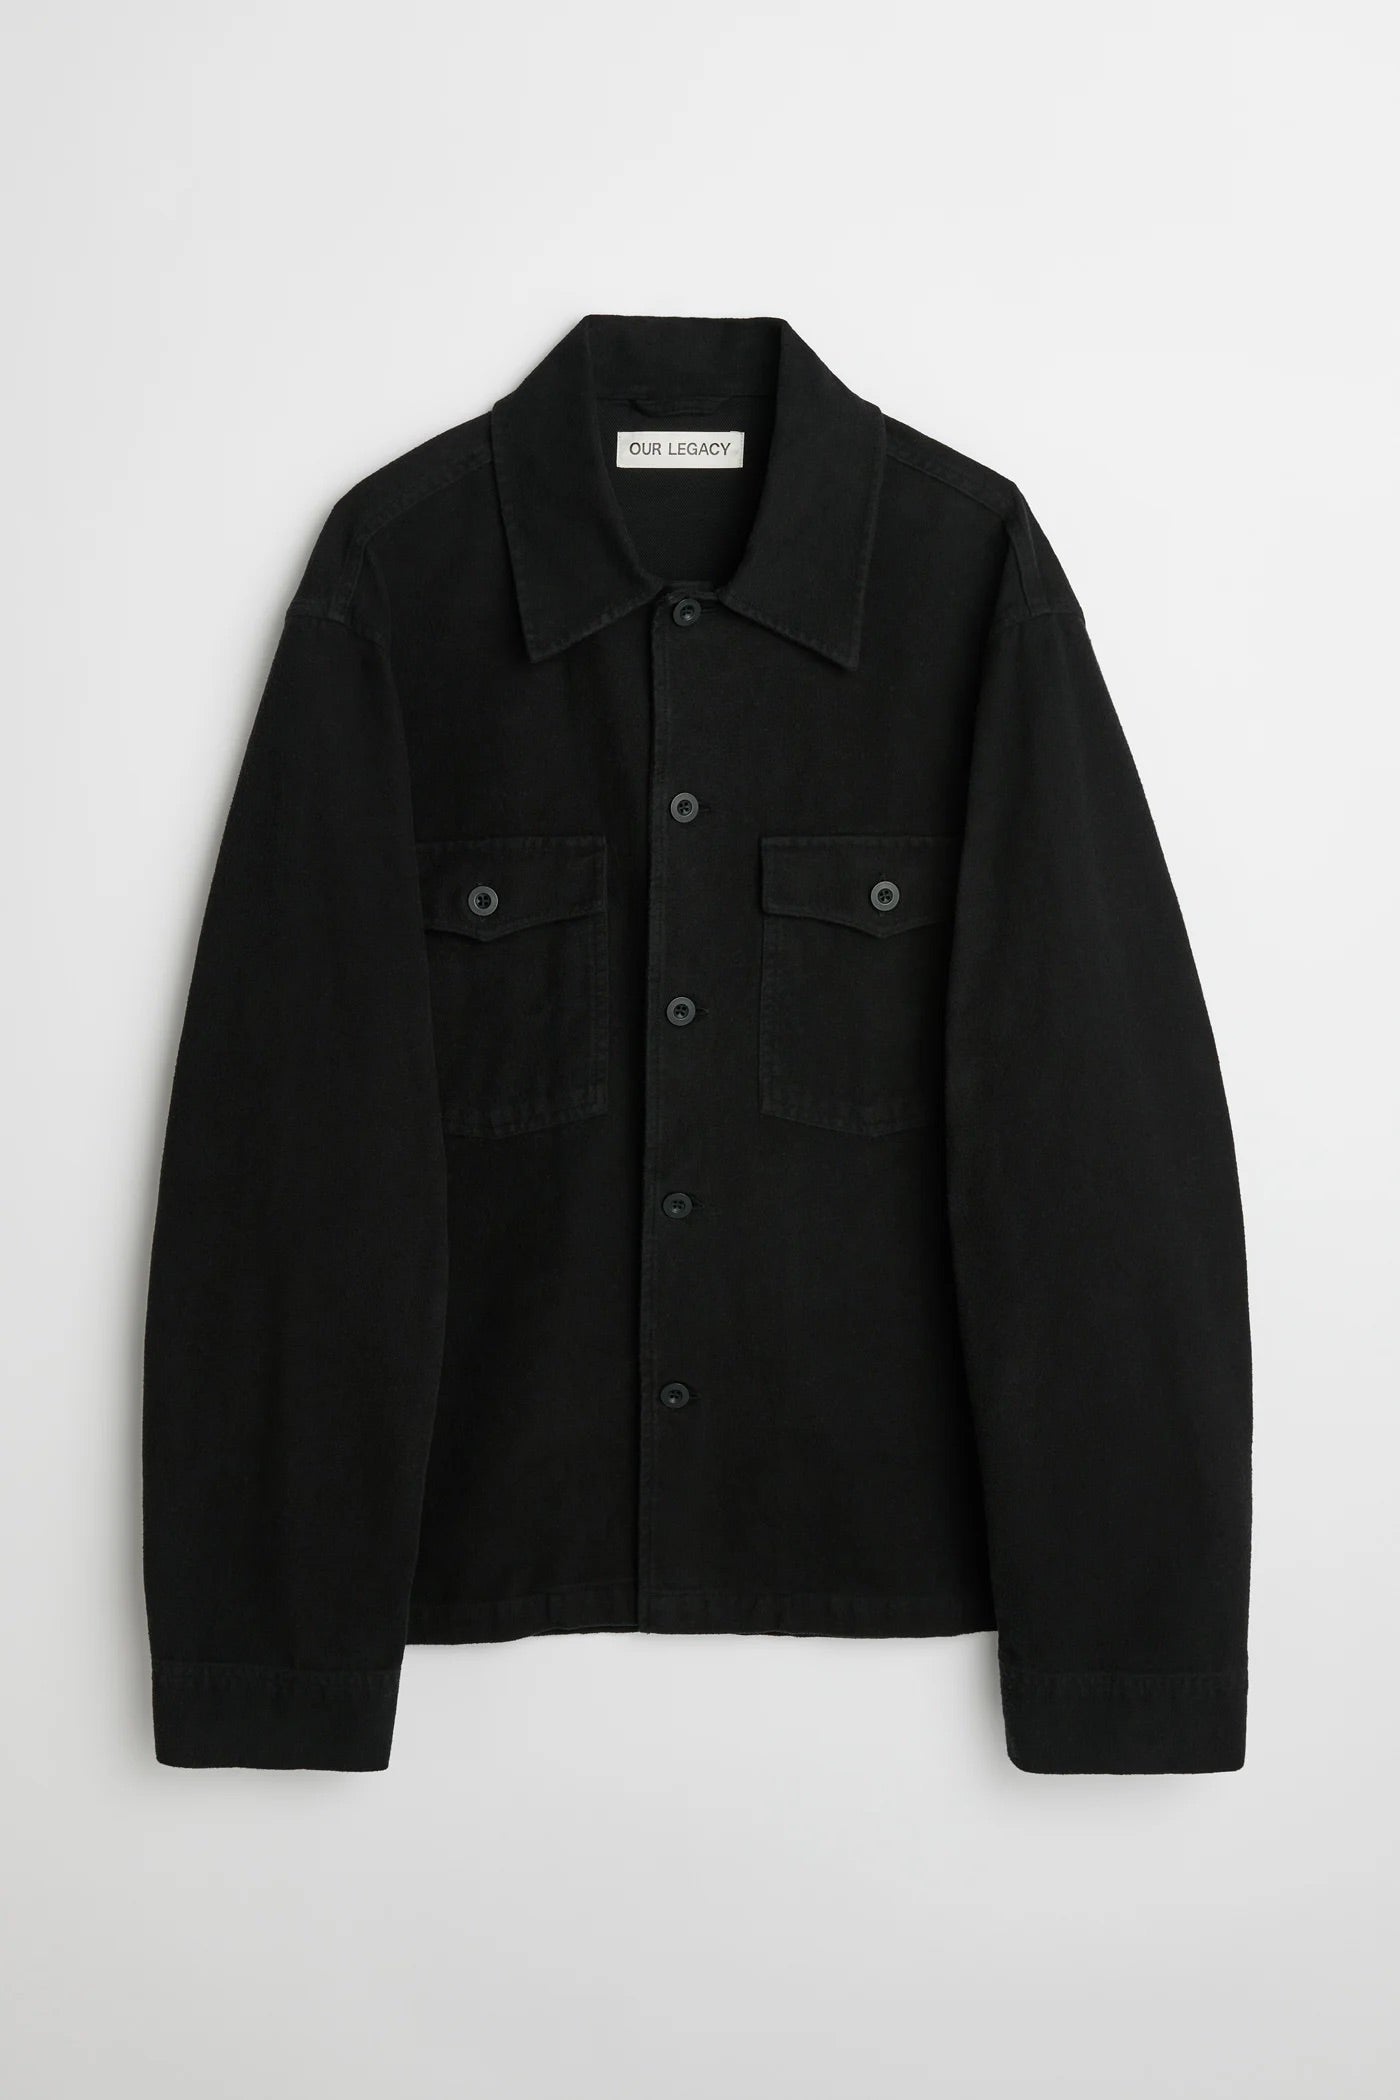 OUR LEGACY 「EVENING COACH JACKET BLACK BRUSHED COTTON」 – SISTER